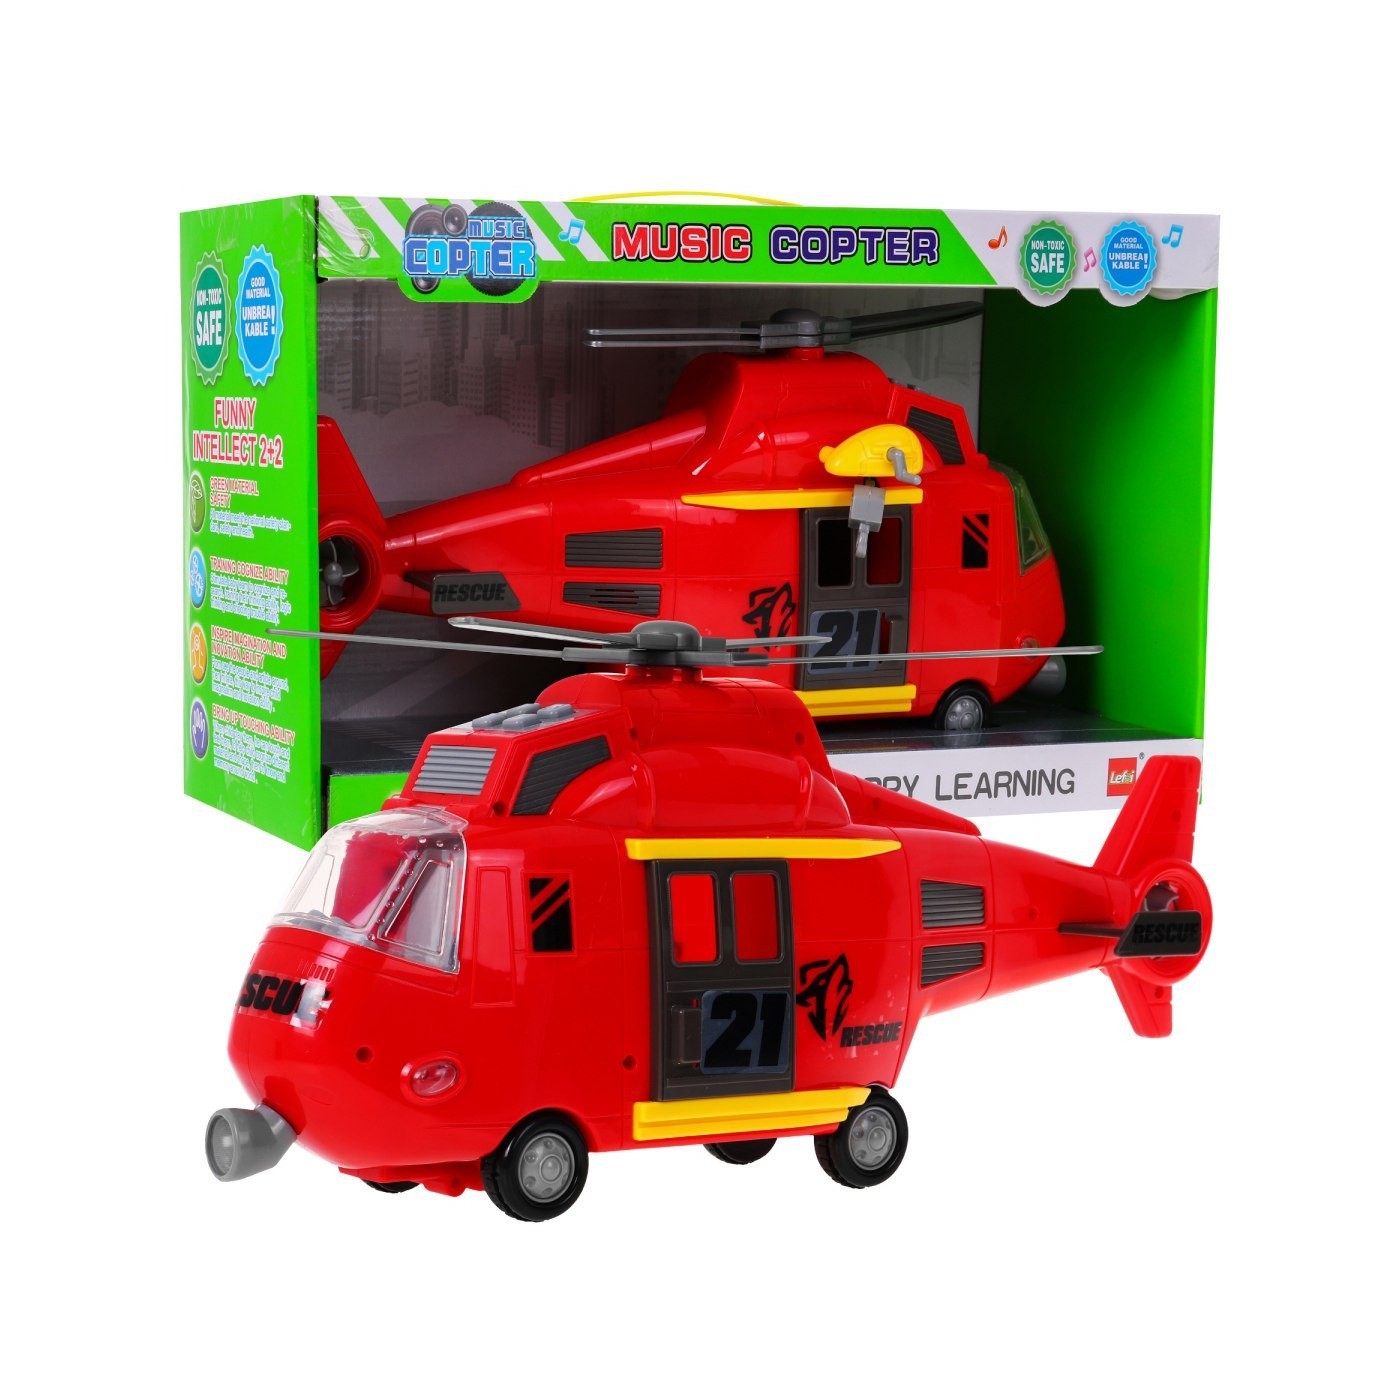 Helicopter with sounds Red